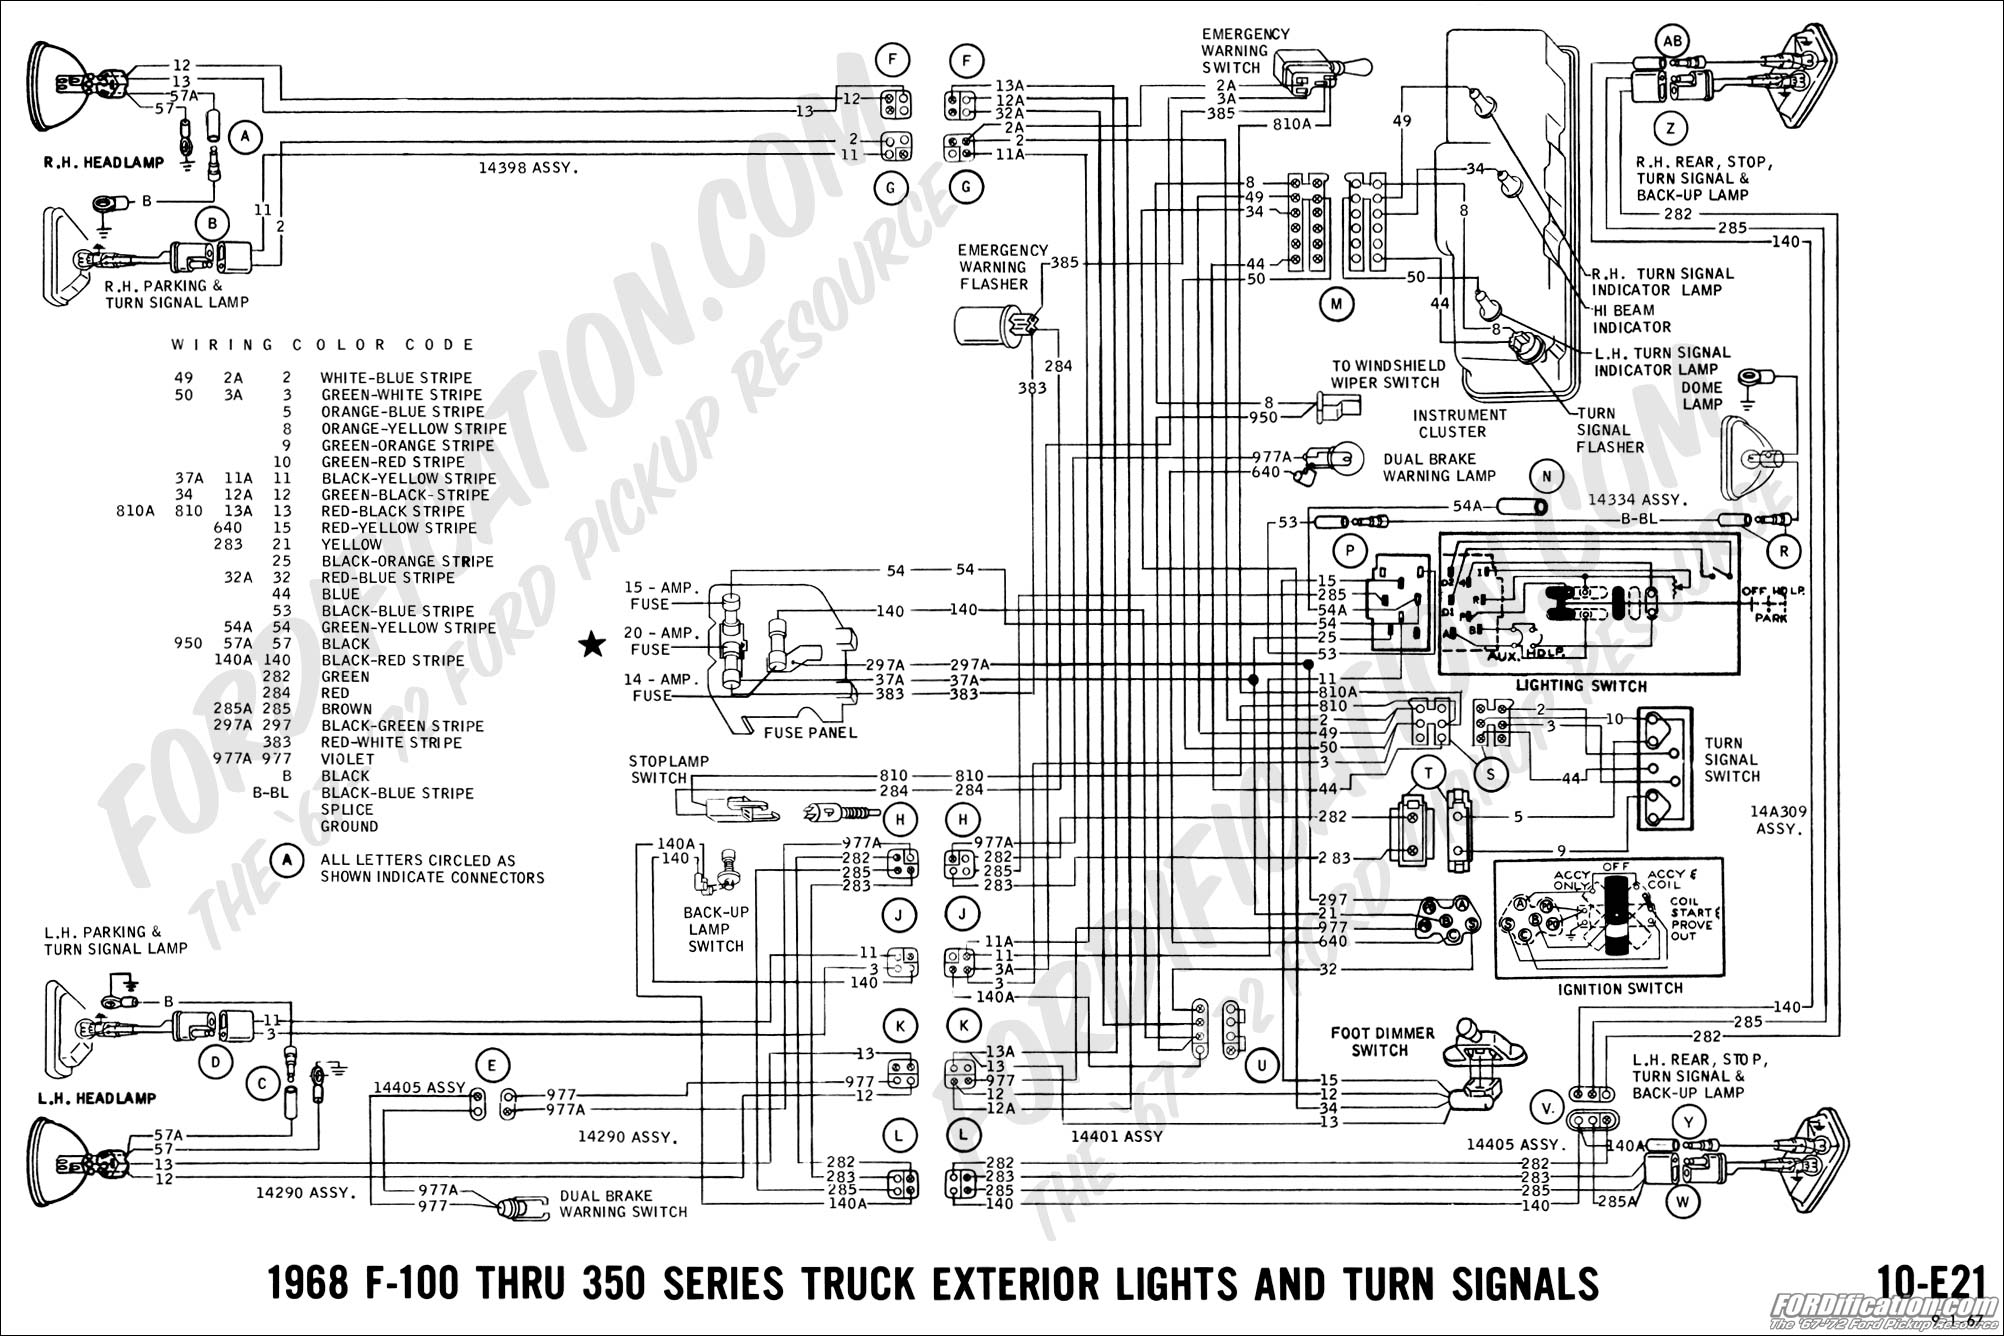 Ford Truck Technical Drawings and Schematics - Section H - Wiring Diagrams  Wiring Diagram For 1971 Ford F100    FORDification.com